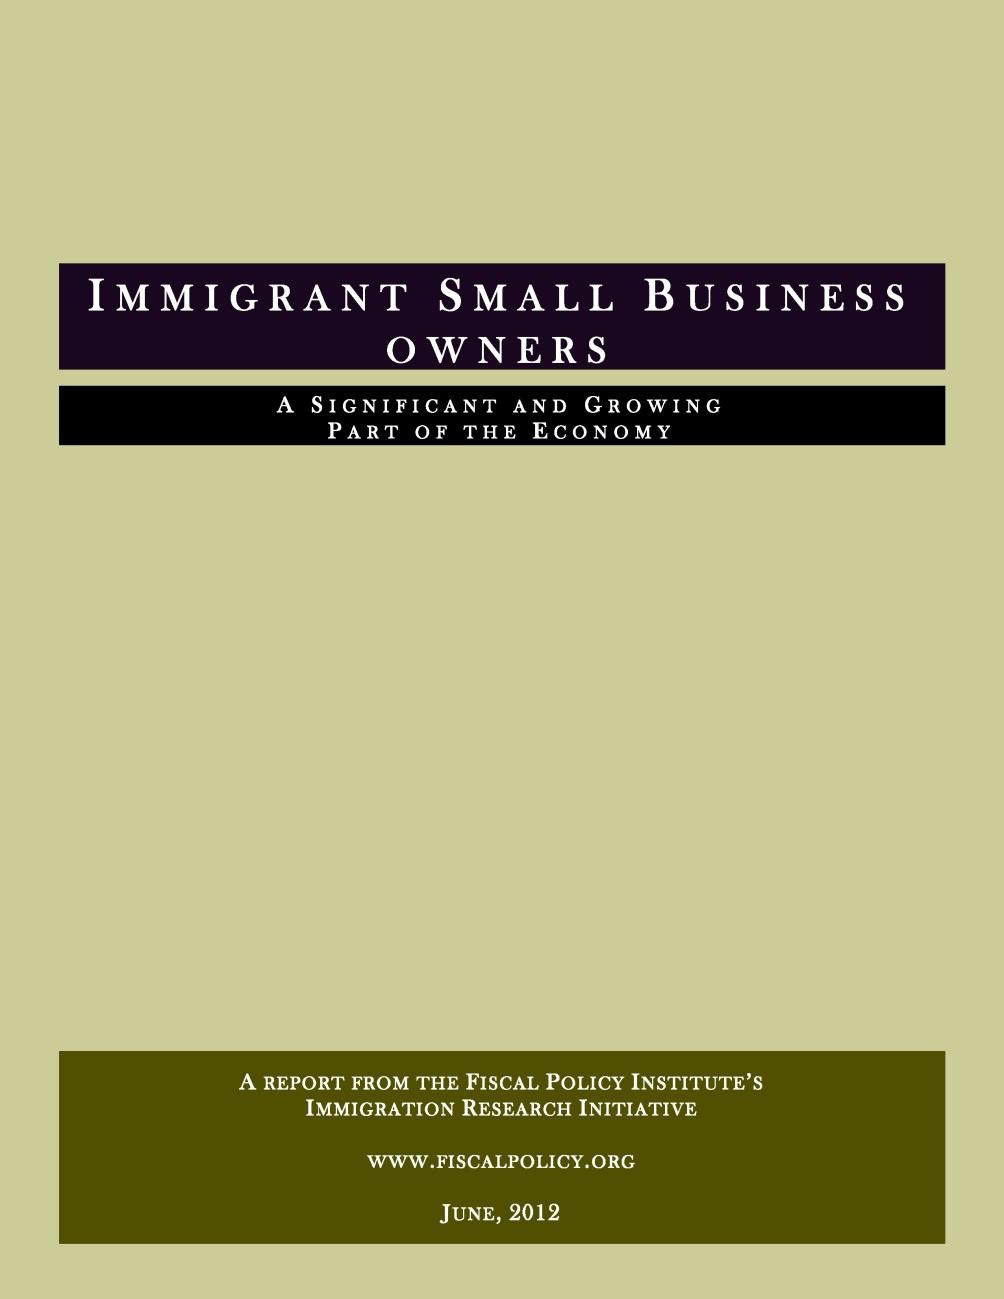 Immigrants are Important Immigrant-owned small businesses generated an